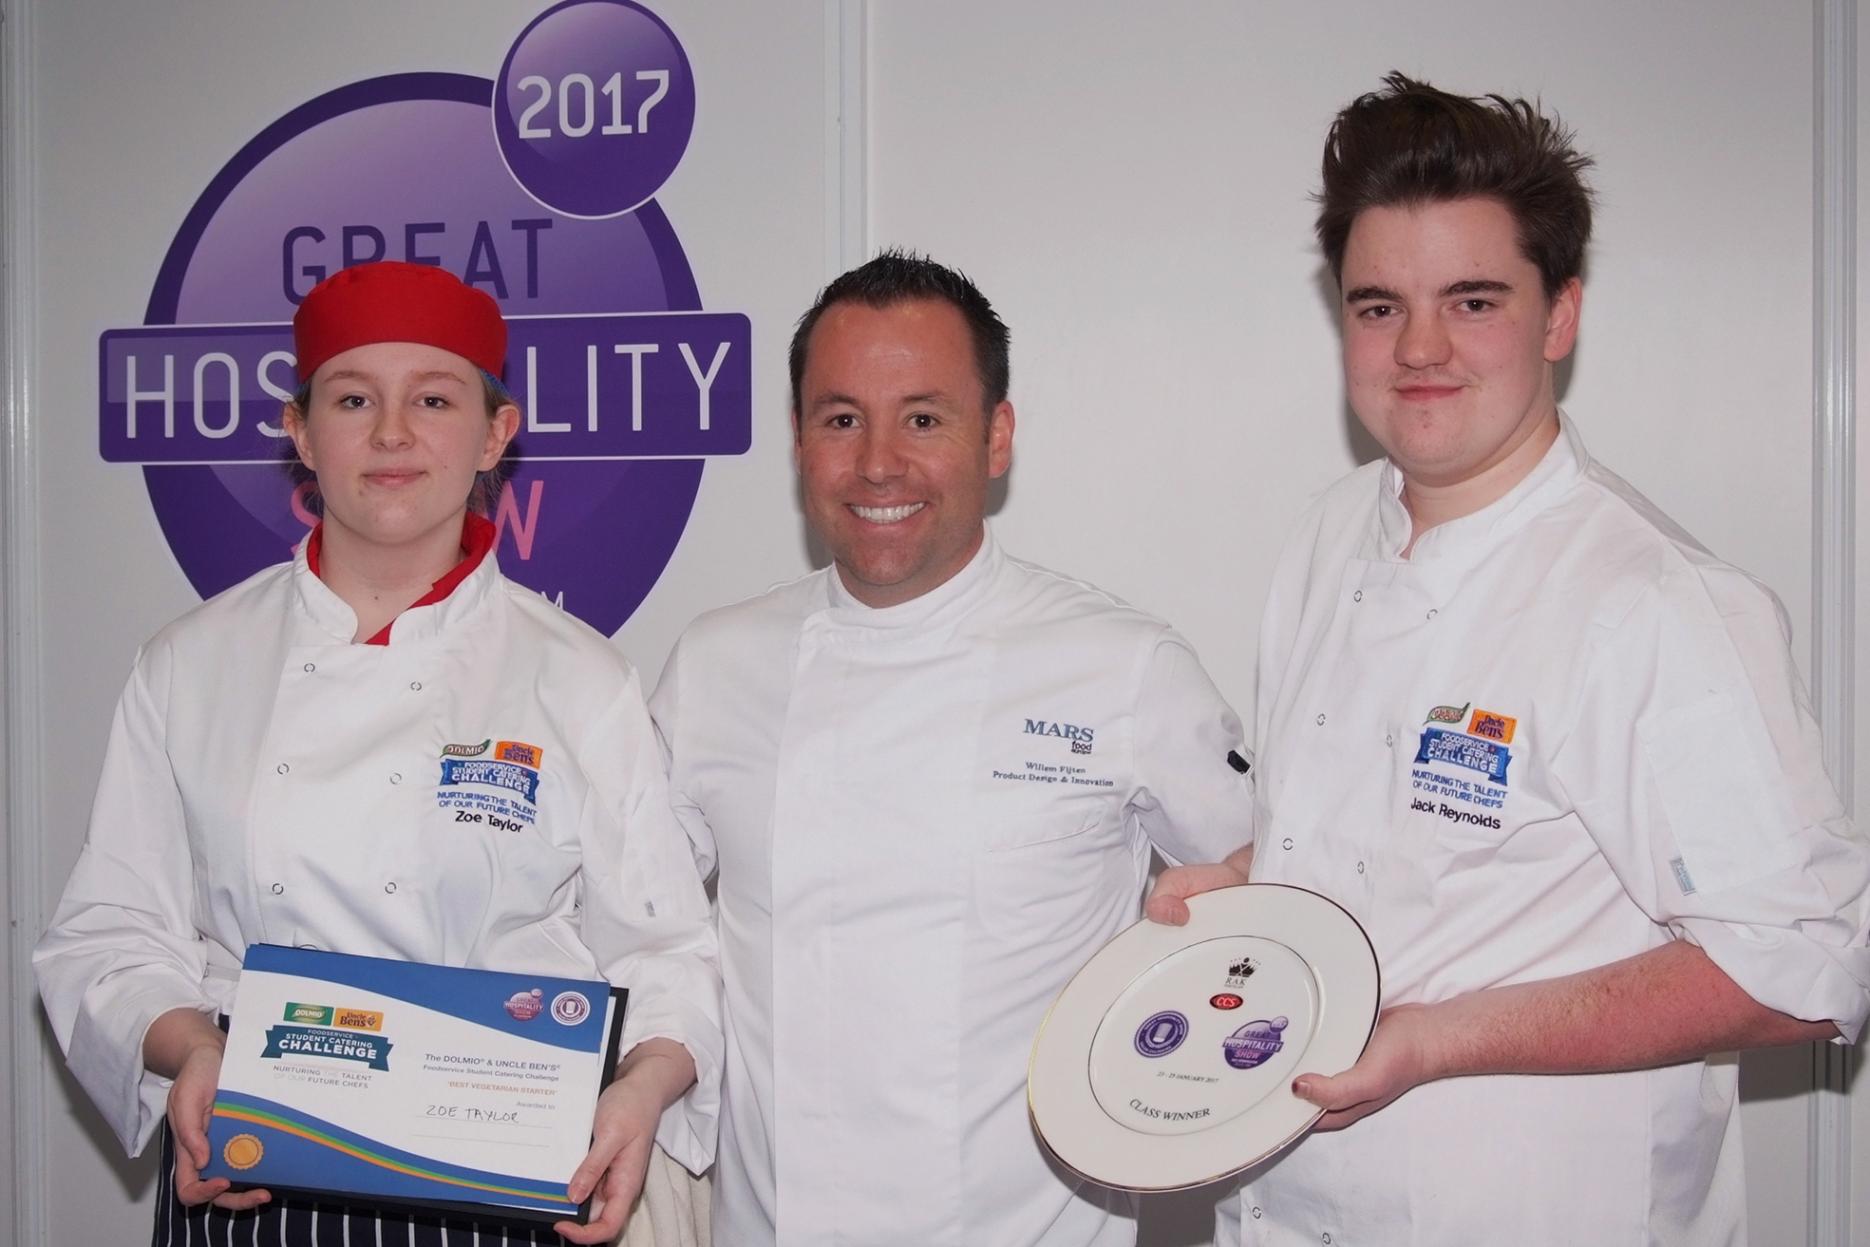 Dolmio & Uncle Ben’s Foodservice Student Catering Challenge winners revealed